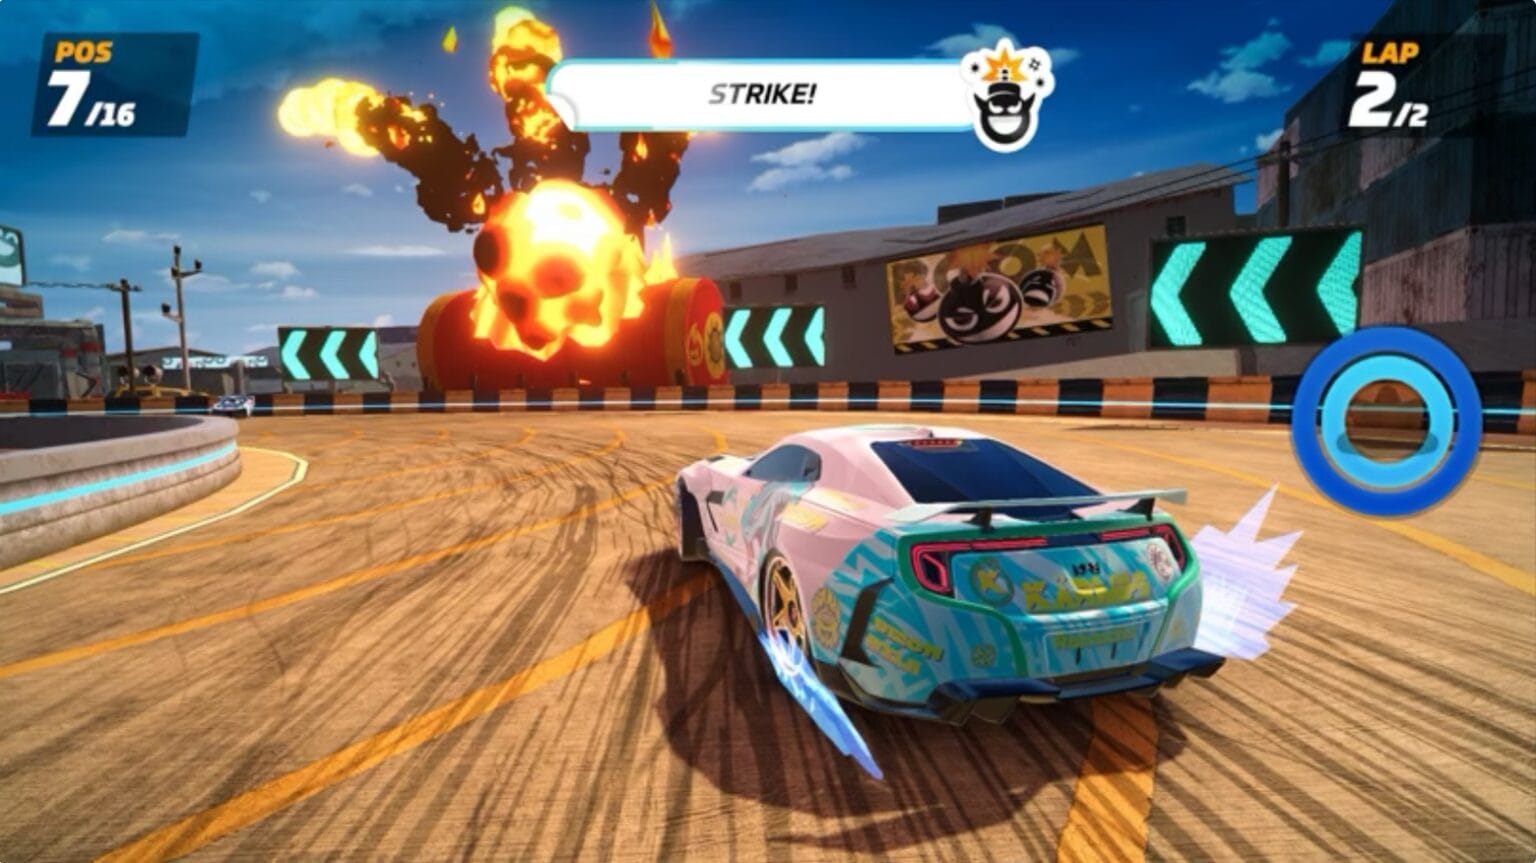 Toss your sanity out the window and play ‘Detonation Racing’